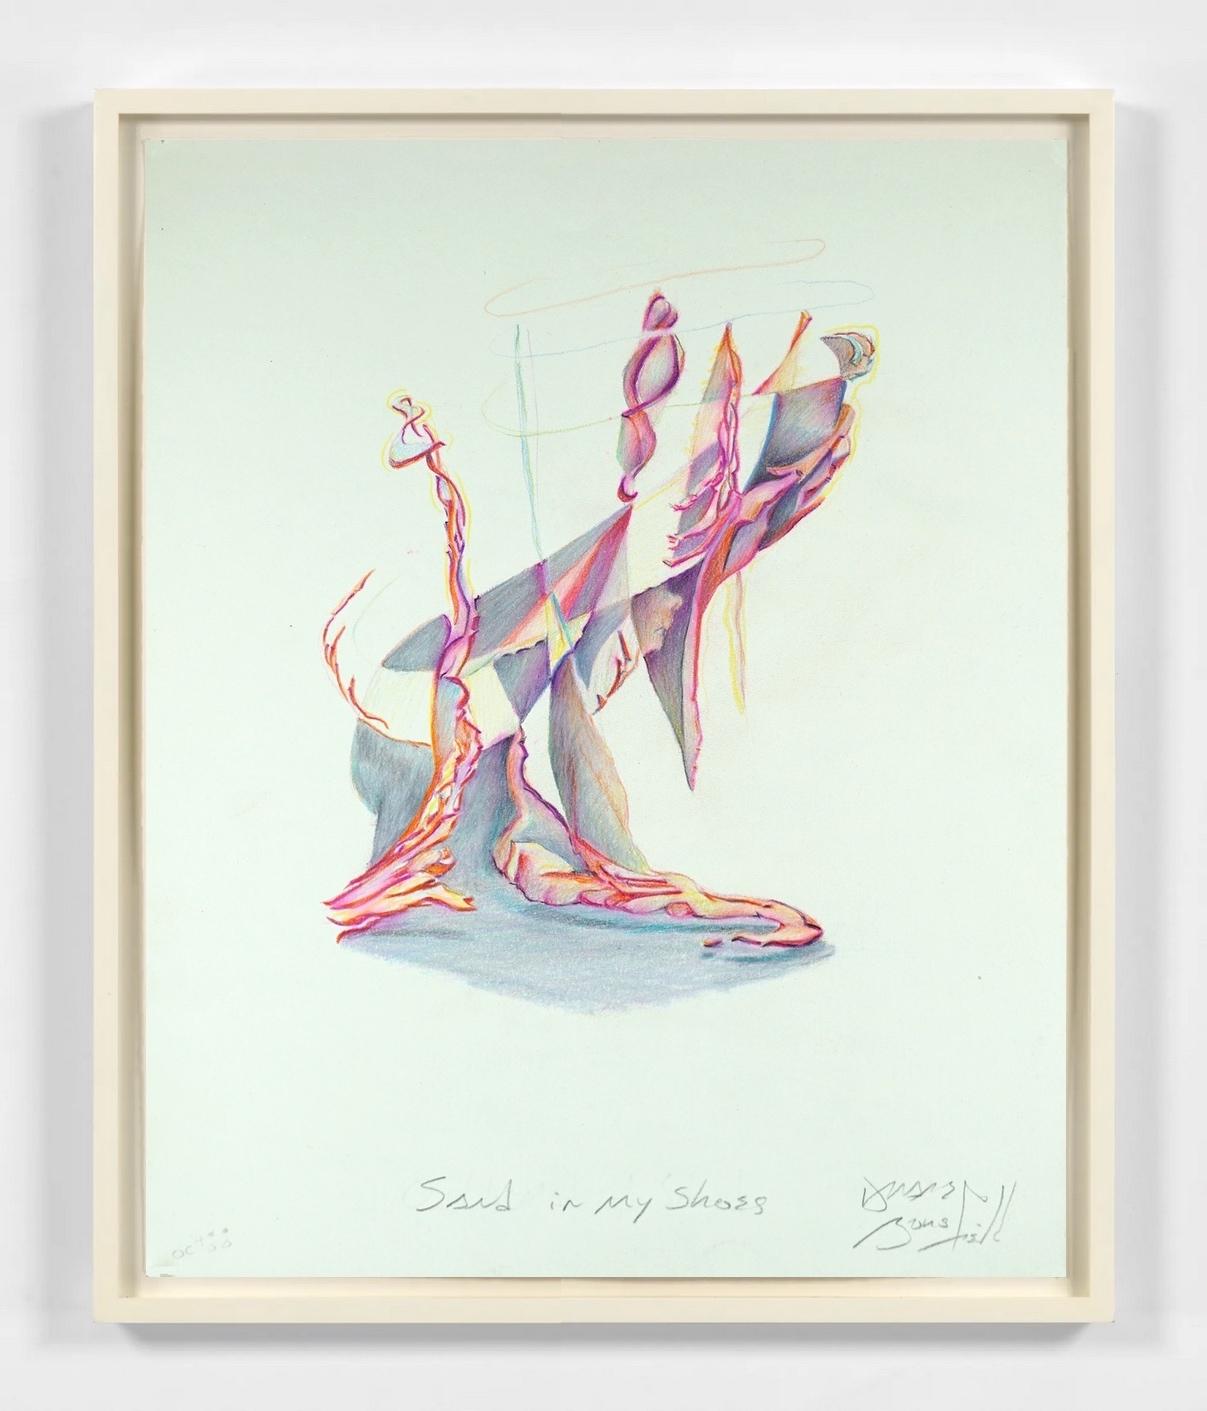 Duane Bousfield Abstract Drawing - Sand in my Shoes